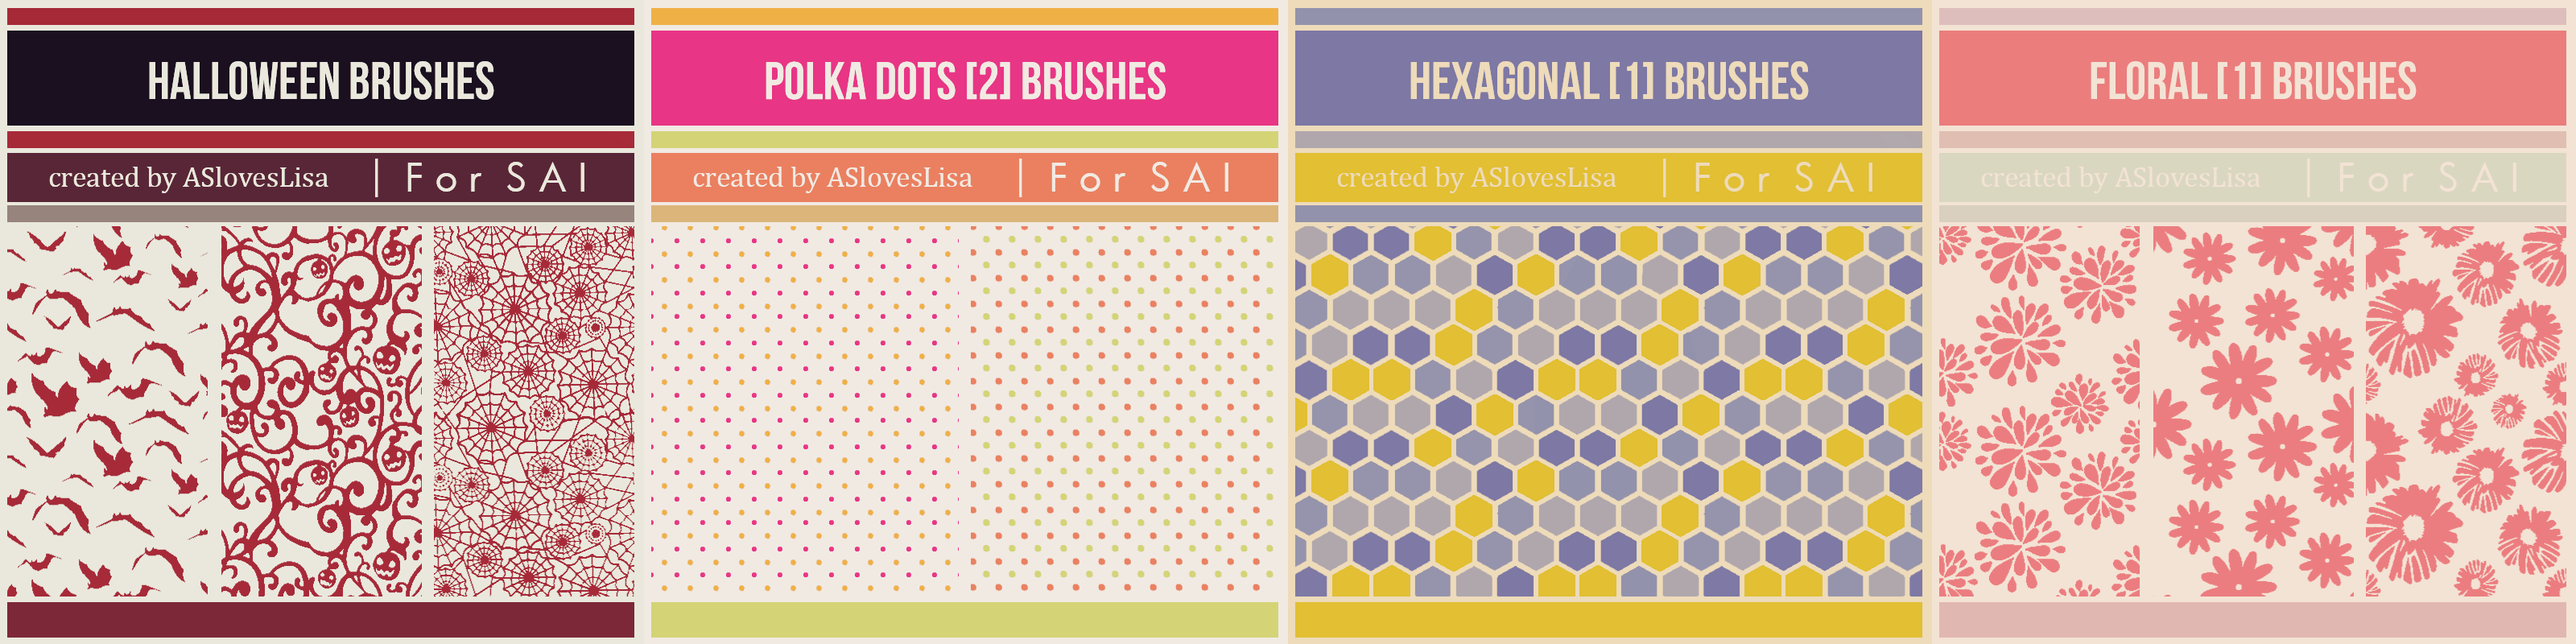 _for_sai__double_colour_polka_dots_by_asloveslisa-d5xgzdi_副本.png